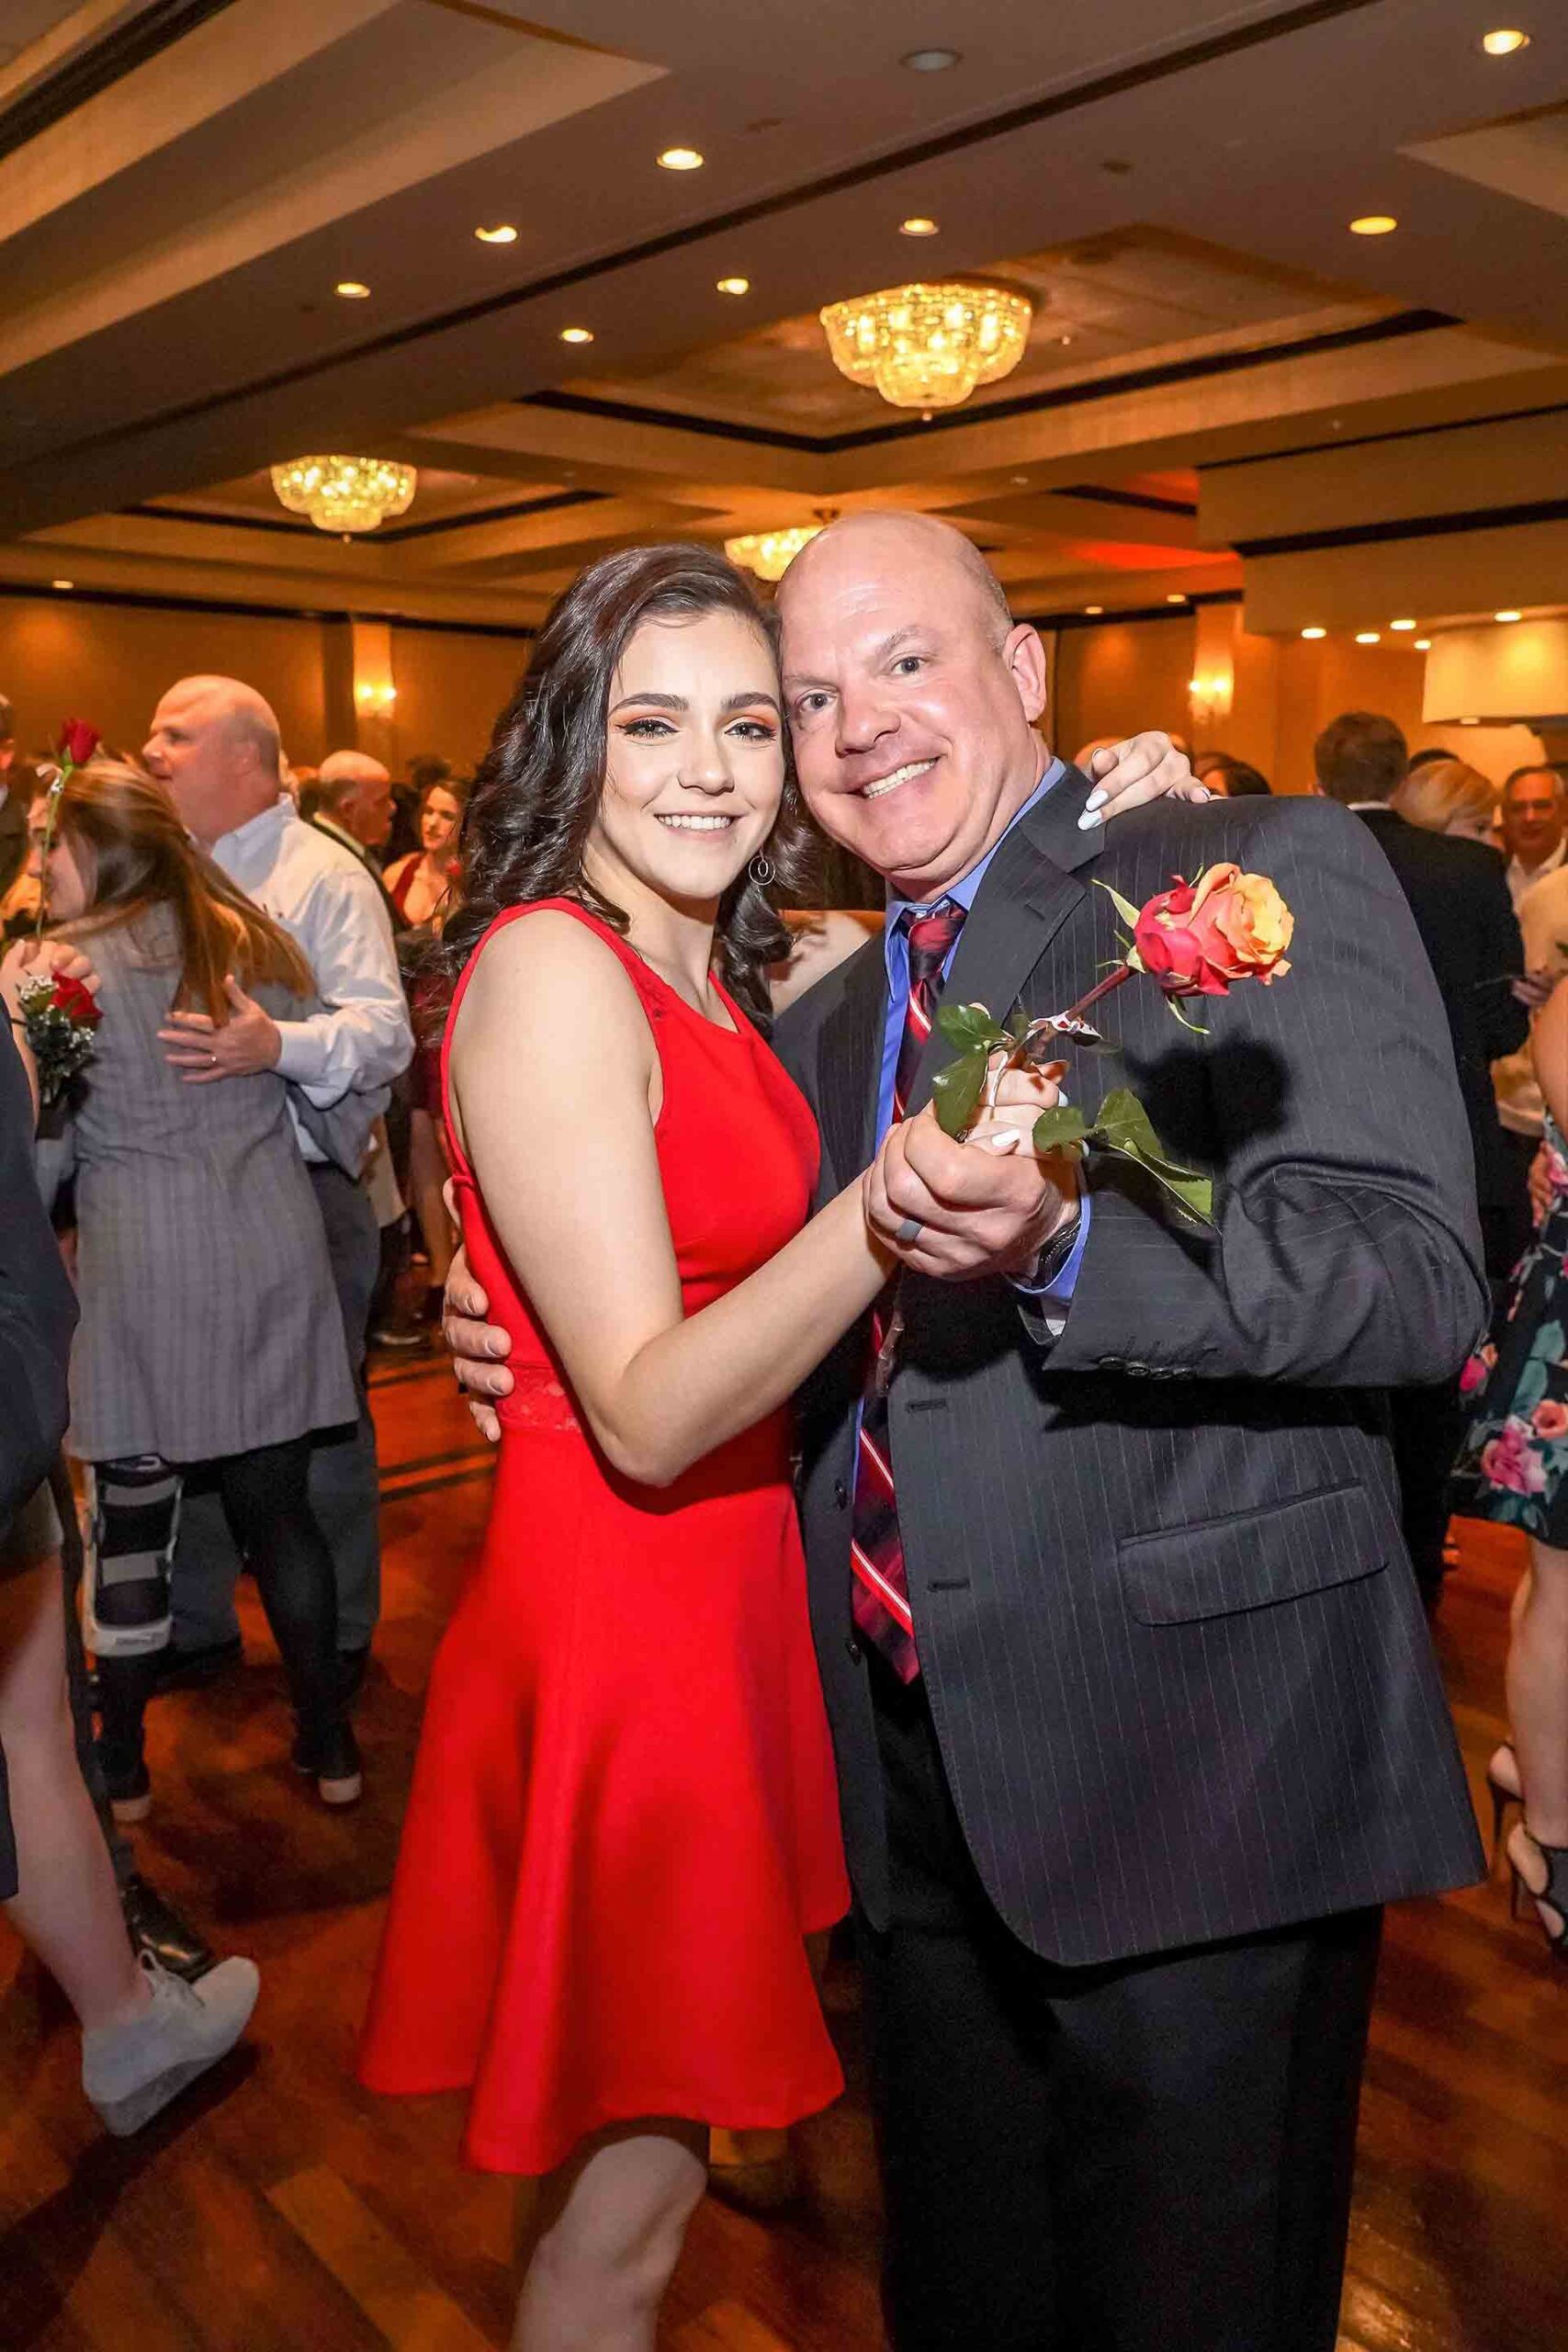 father-daughter-dance-2019-girl-with-red-dress-dancing-with-father